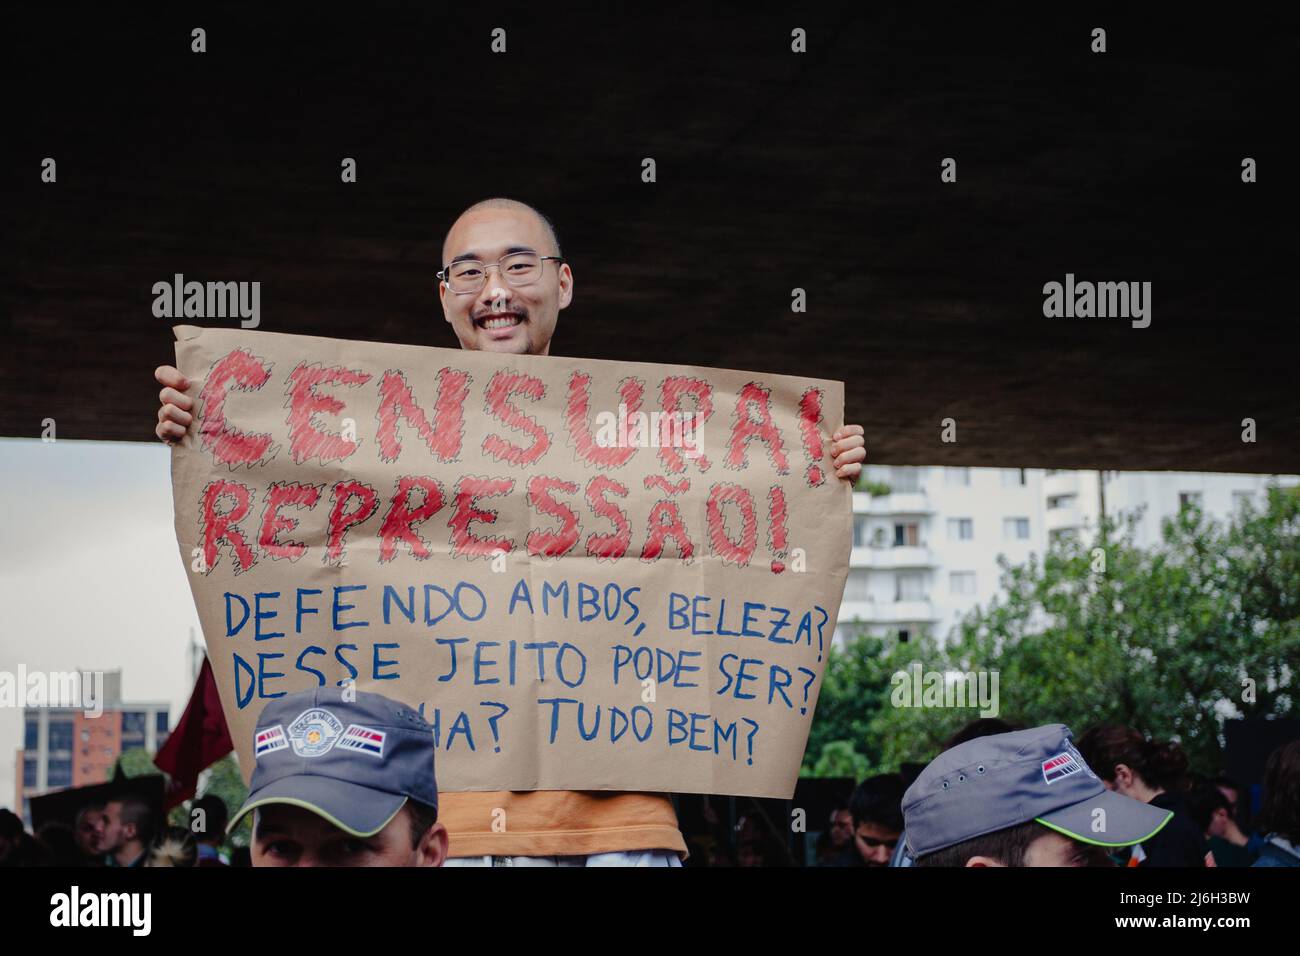 Sao Paulo, Brazil. 28th May, 2011. Demonstrators gather outside Art Museum of Sao Paulo (MASP) during 'Marcha da Liberdade' (Freedom March) along Paulista Avenue in Sao Paulo, Brazil. Despite the prohibition, the demonstrators were concentrated at MASP. After an initial delay the march set-off following talks between police and and leaders of the march, the protest was released to start at 16:00, since there is no apology to drugs. The Freedom March emerged after the police repression that occurred a week earlier, at the 'Marcha da Maconha' (Marijuana March). Stock Photo